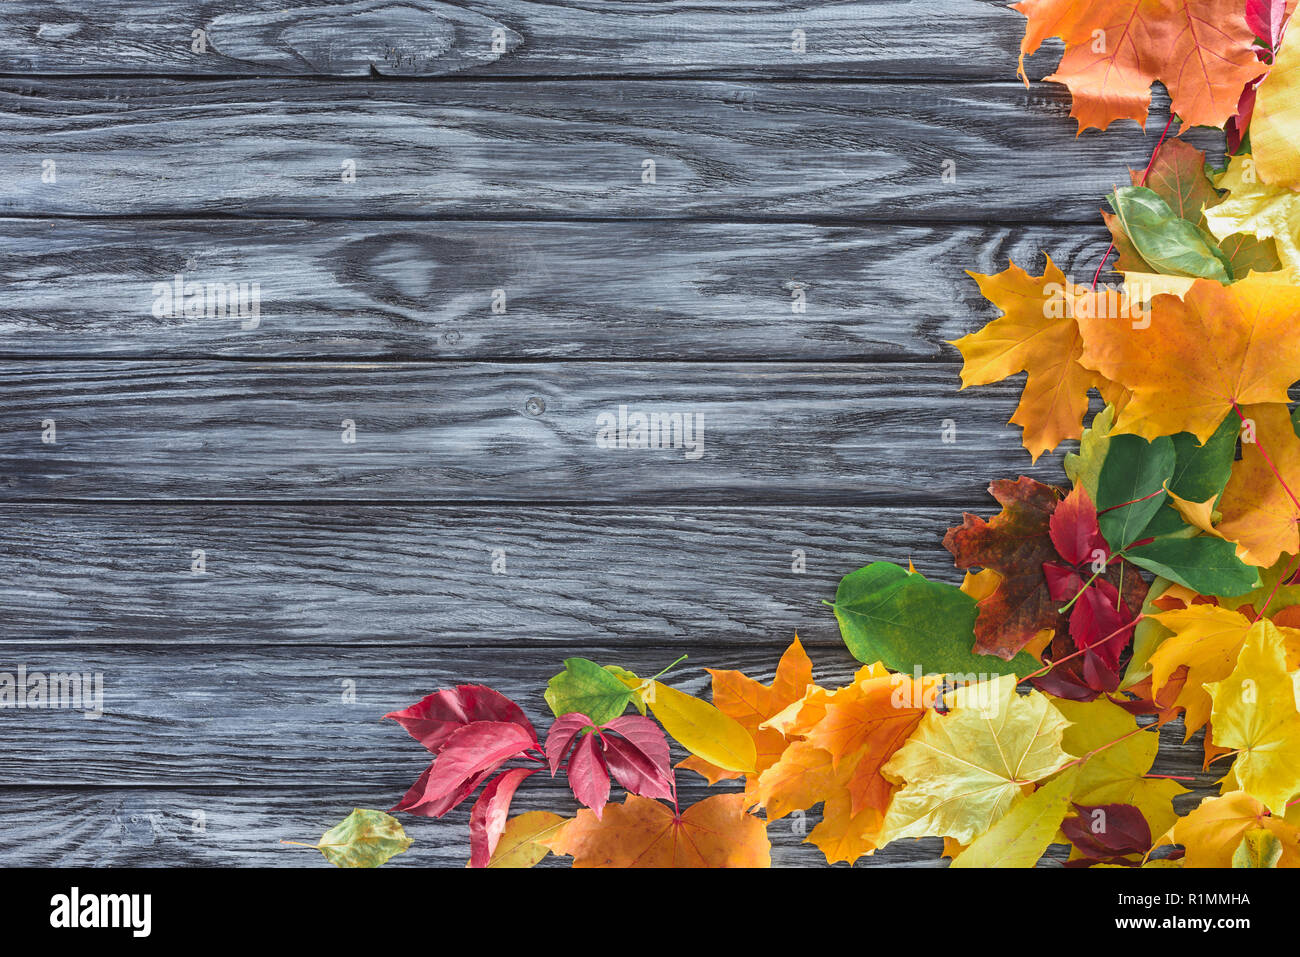 top view of autumnal leaves on grey wooden surface Stock Photo